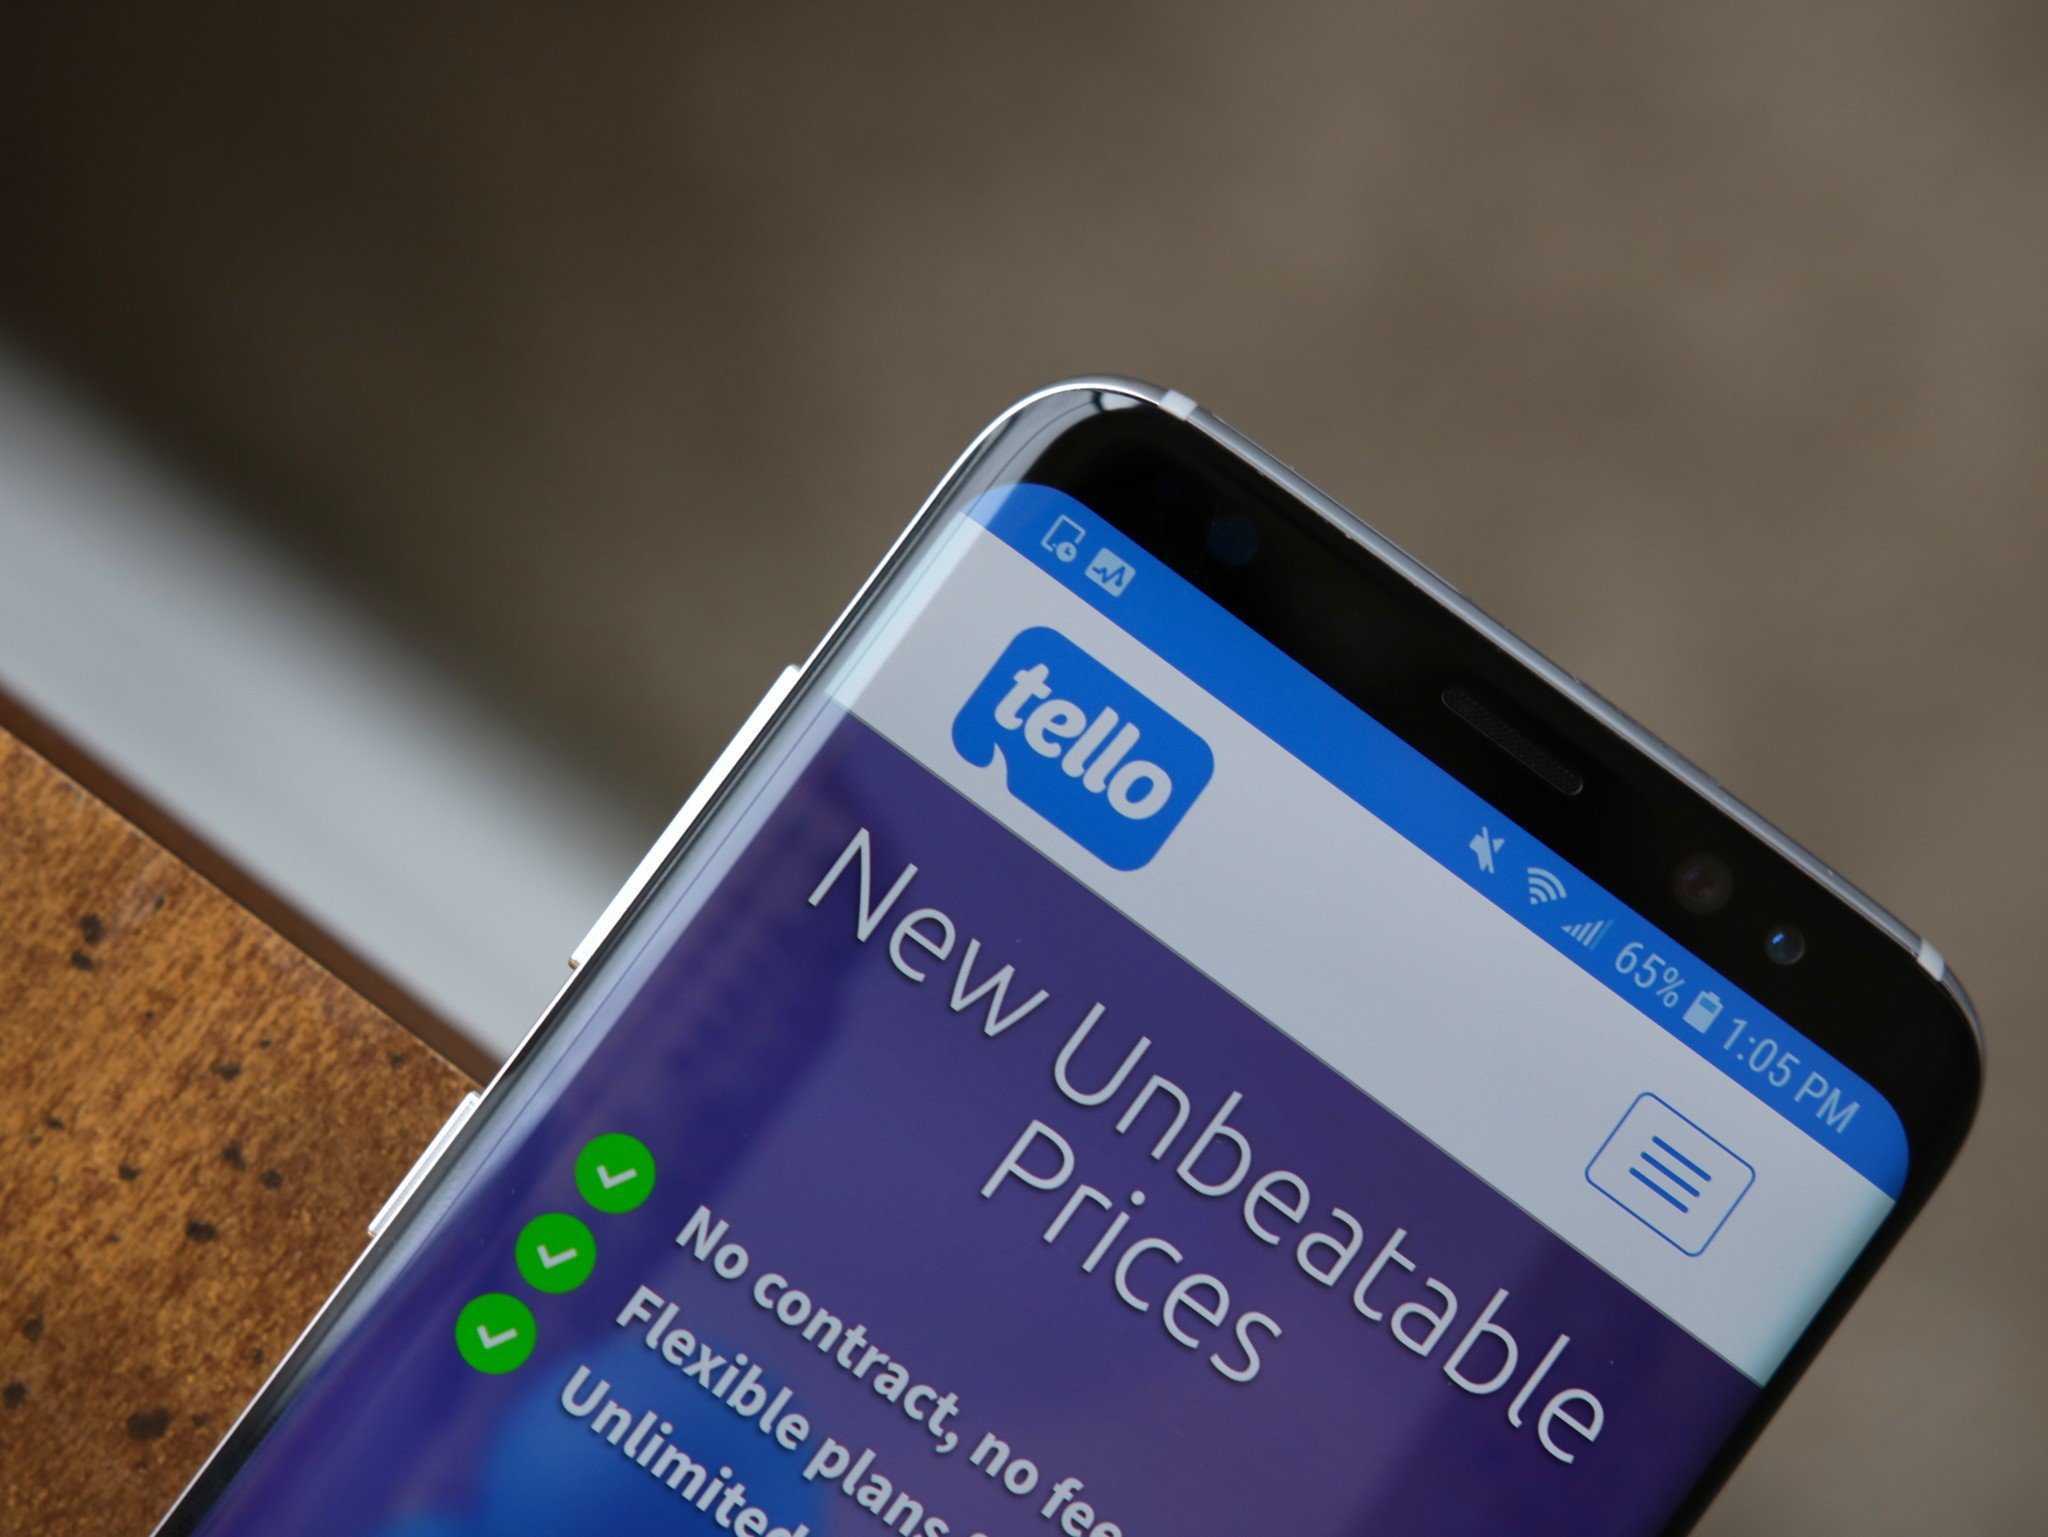 Tello Mobile sale offers 50% off your phone bill for three months